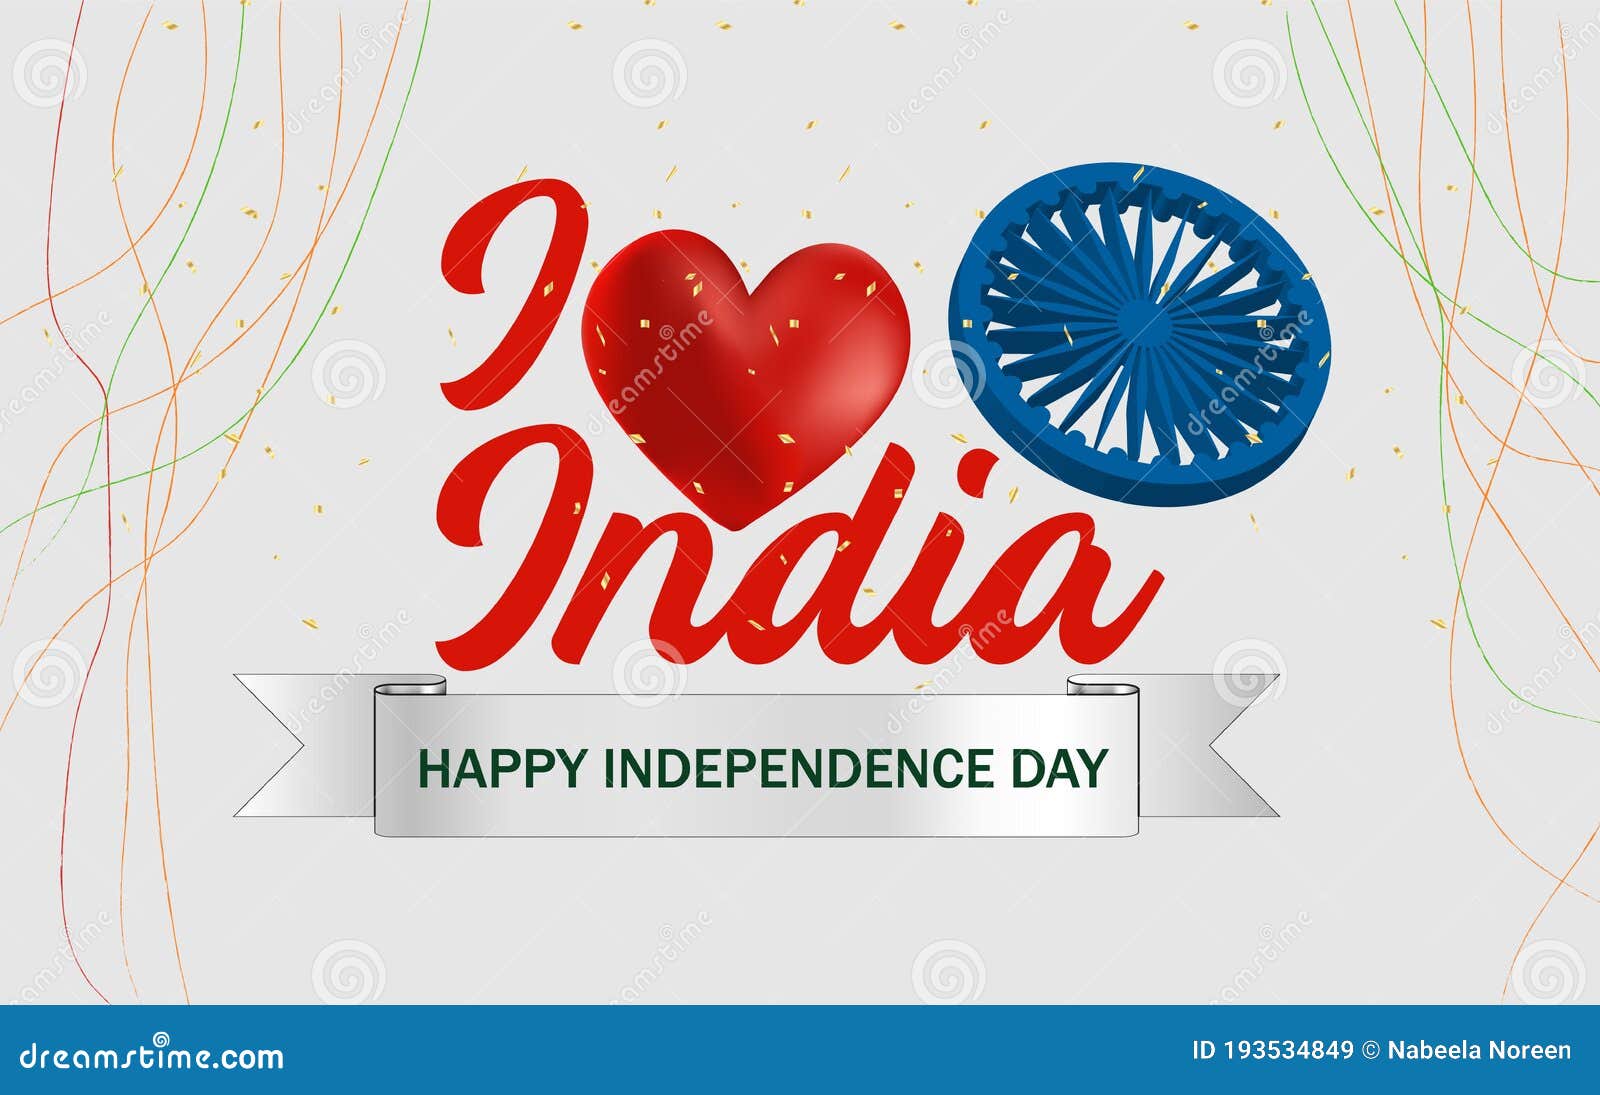 15th August Indian Independence Day with Heart Touching Background. Vector  Illustration Stock Vector - Illustration of flag, happy: 193534849